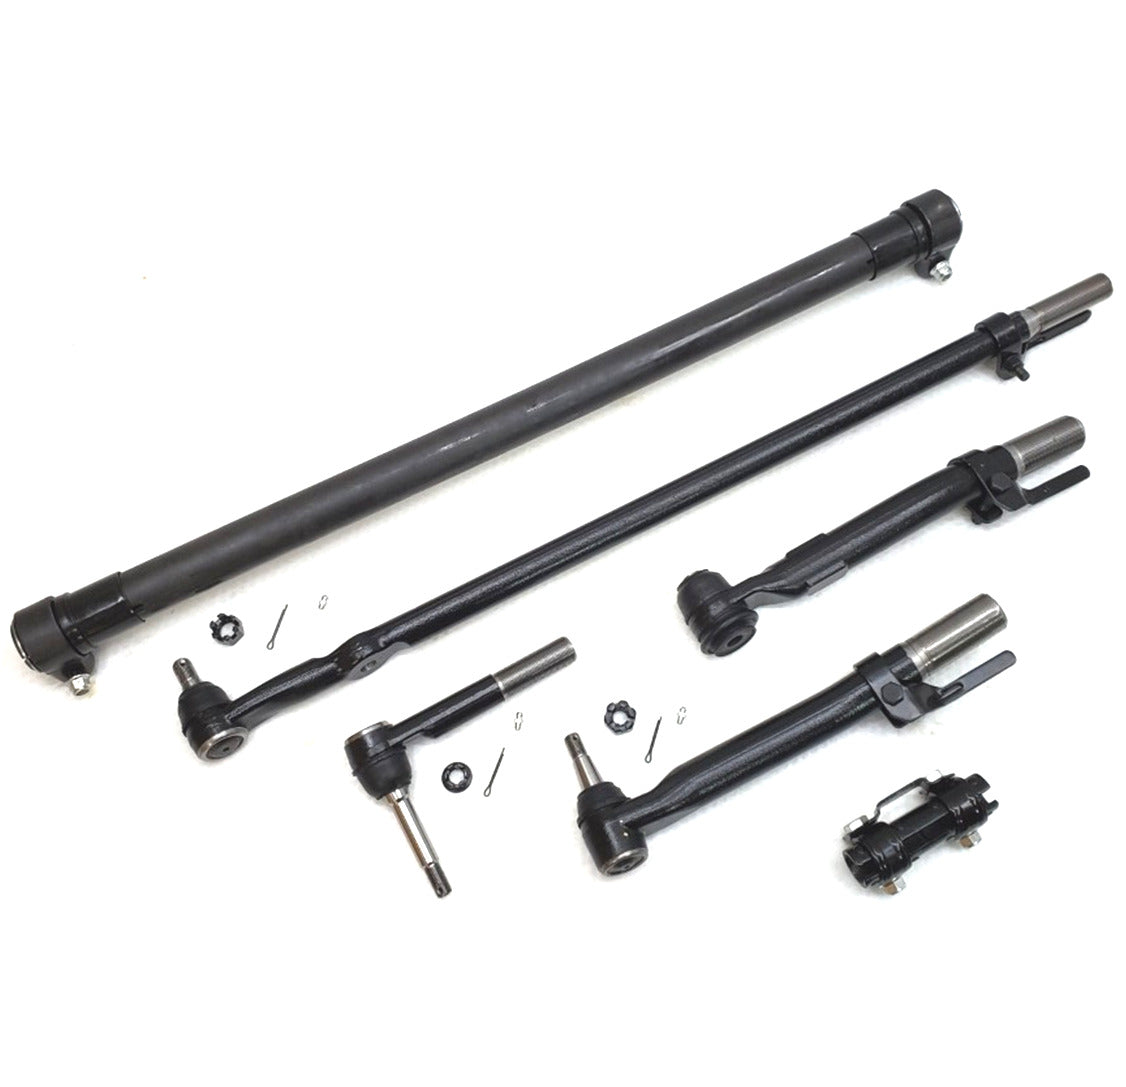 XRF Drag Link Tie Rod Sleeve Steering Kit for 2008-2010 Ford F250, F350 Super Duty 4x4